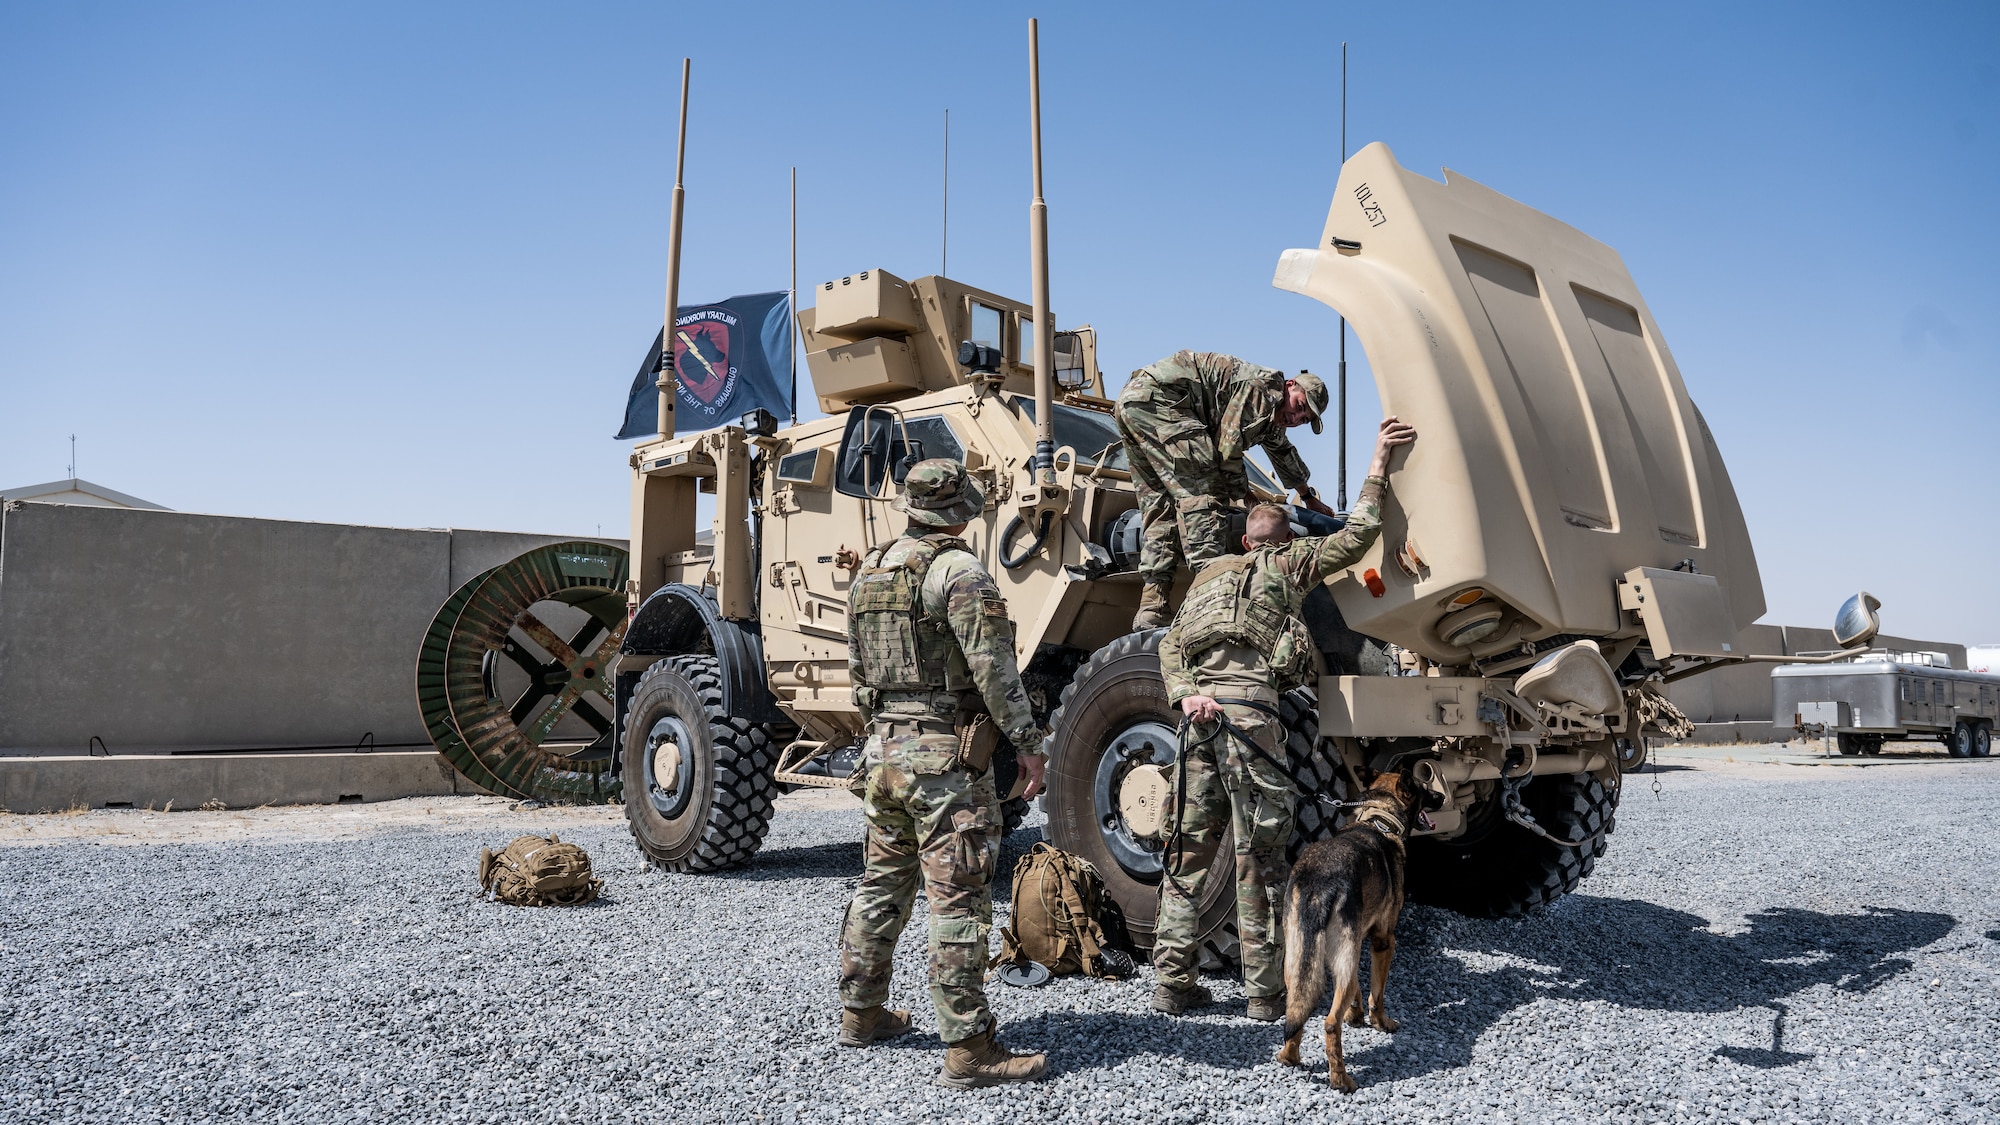 U.S. Air Force Airmen and military working dog Lucky, from the 386th Expeditionary Security Forces Squadron, take a look under the hood of a Mine Resistant Ambush Protected All-Terrain Vehicle (M-ATV) during vehicle familiarity training for the MWD handlers at Ali Al Salem Air Base, Kuwait, July 13, 2023. The M-ATV is designed to provide the same levels of protection as the larger and heavier vehicles, but with enhanced mobility in the region’s rough terrain. (U.S. Air Force photo by Staff Sgt. Kevin Long)